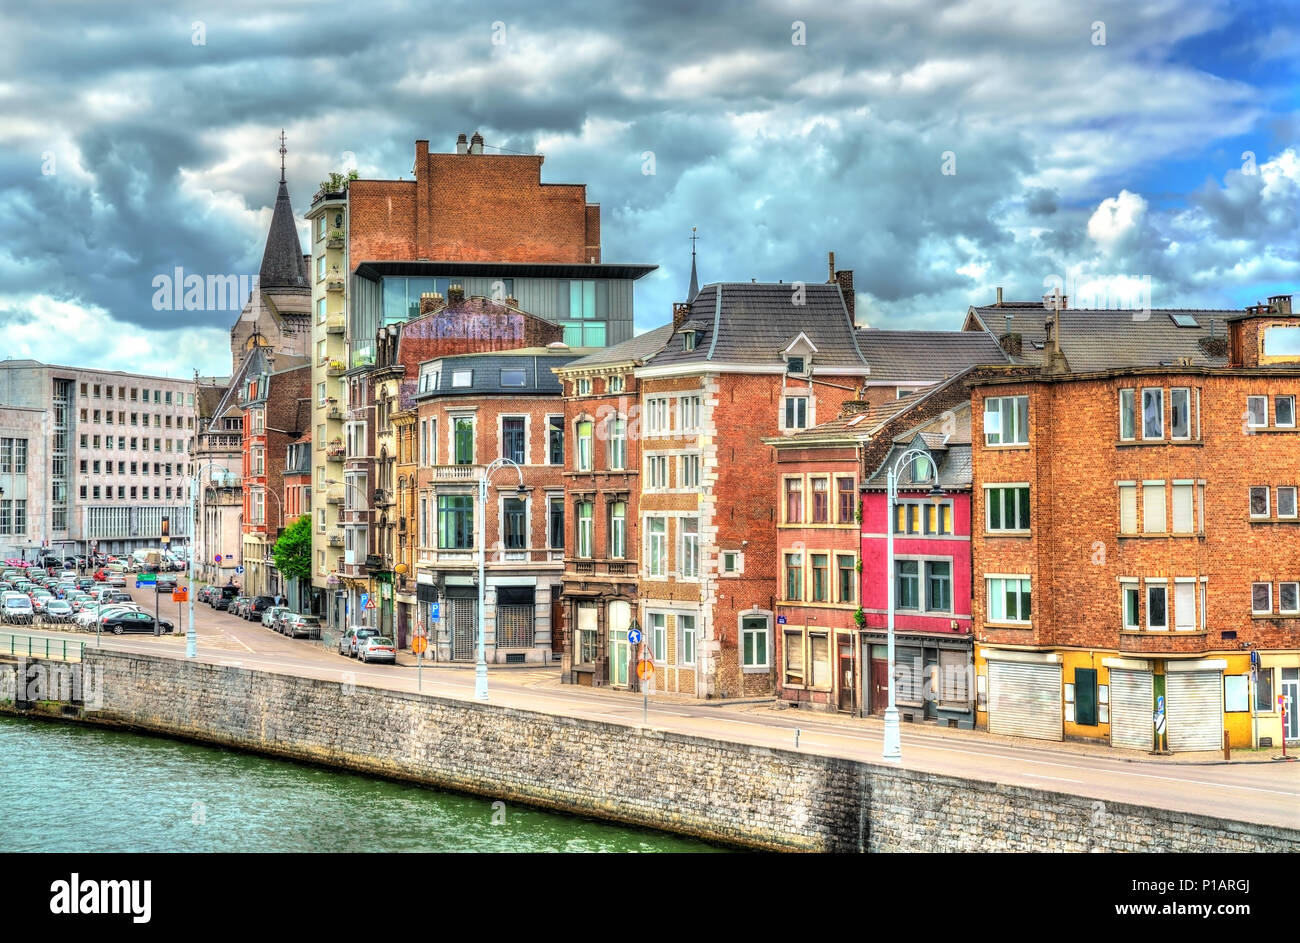 Typical buildings in the city centre of Liege, Belgium Stock Photo - Alamy